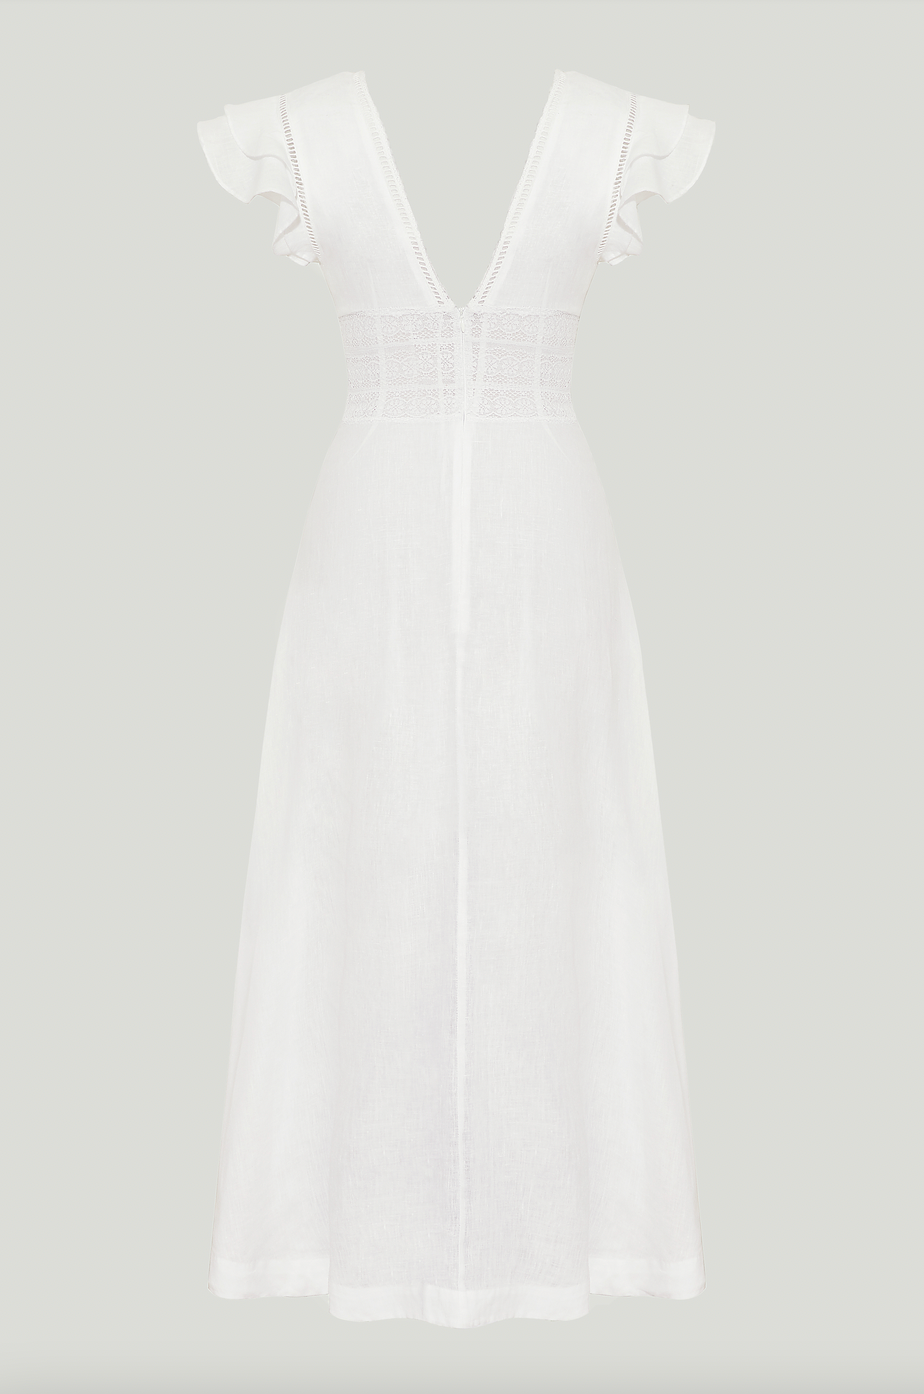 This dreamy dress is perfect for brides-to-be and summer events alike. With delicate lace inserts and trims, ruffled sleeves, and a romantic, versatile white hue, the Basel is your hero white dress. 